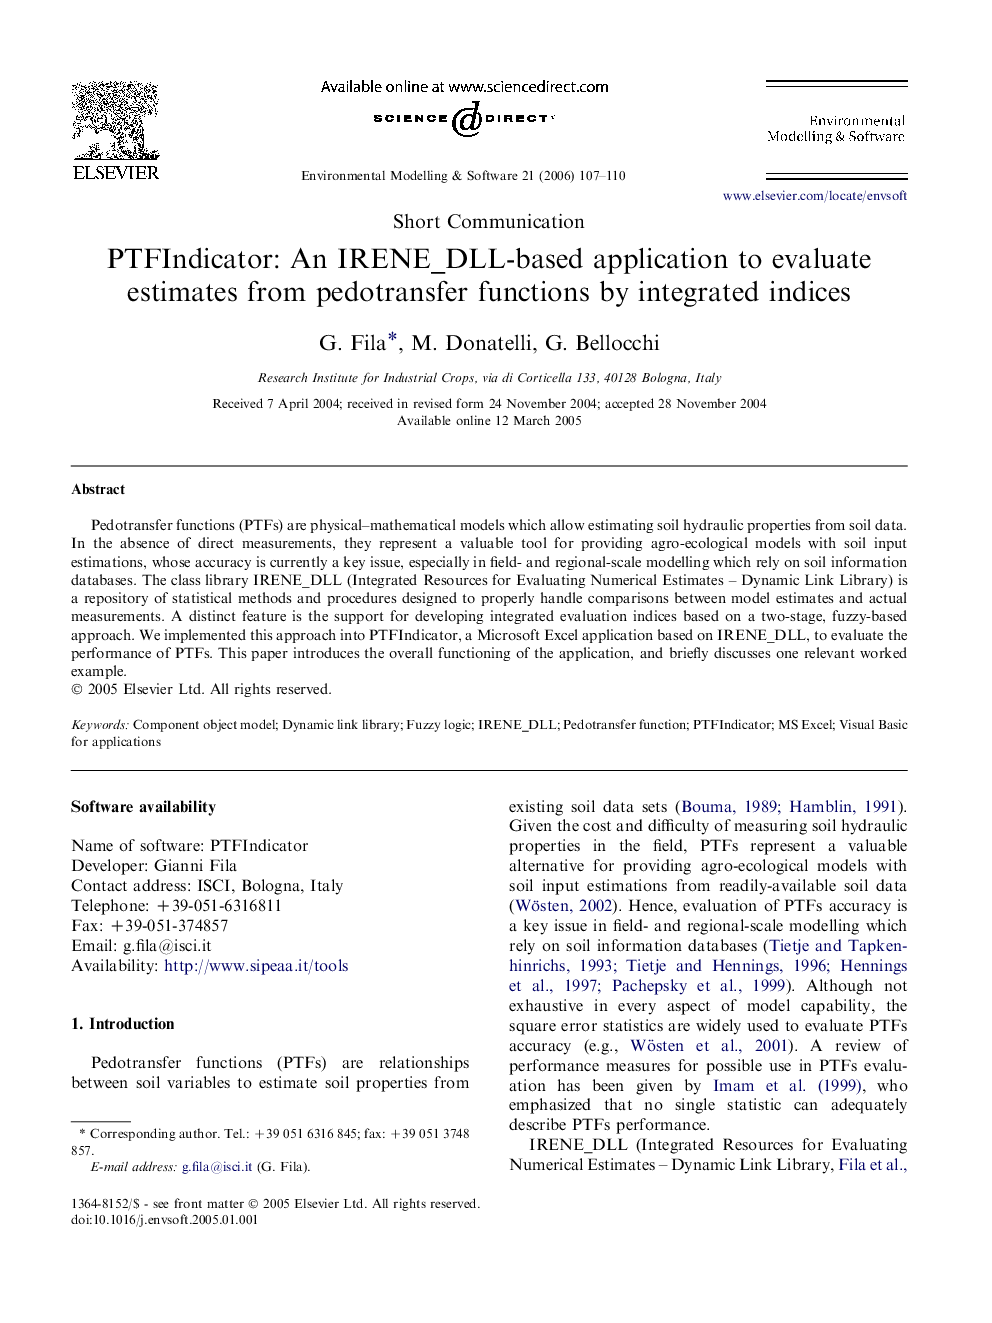 PTFIndicator: An IRENE_DLL-based application to evaluate estimates from pedotransfer functions by integrated indices